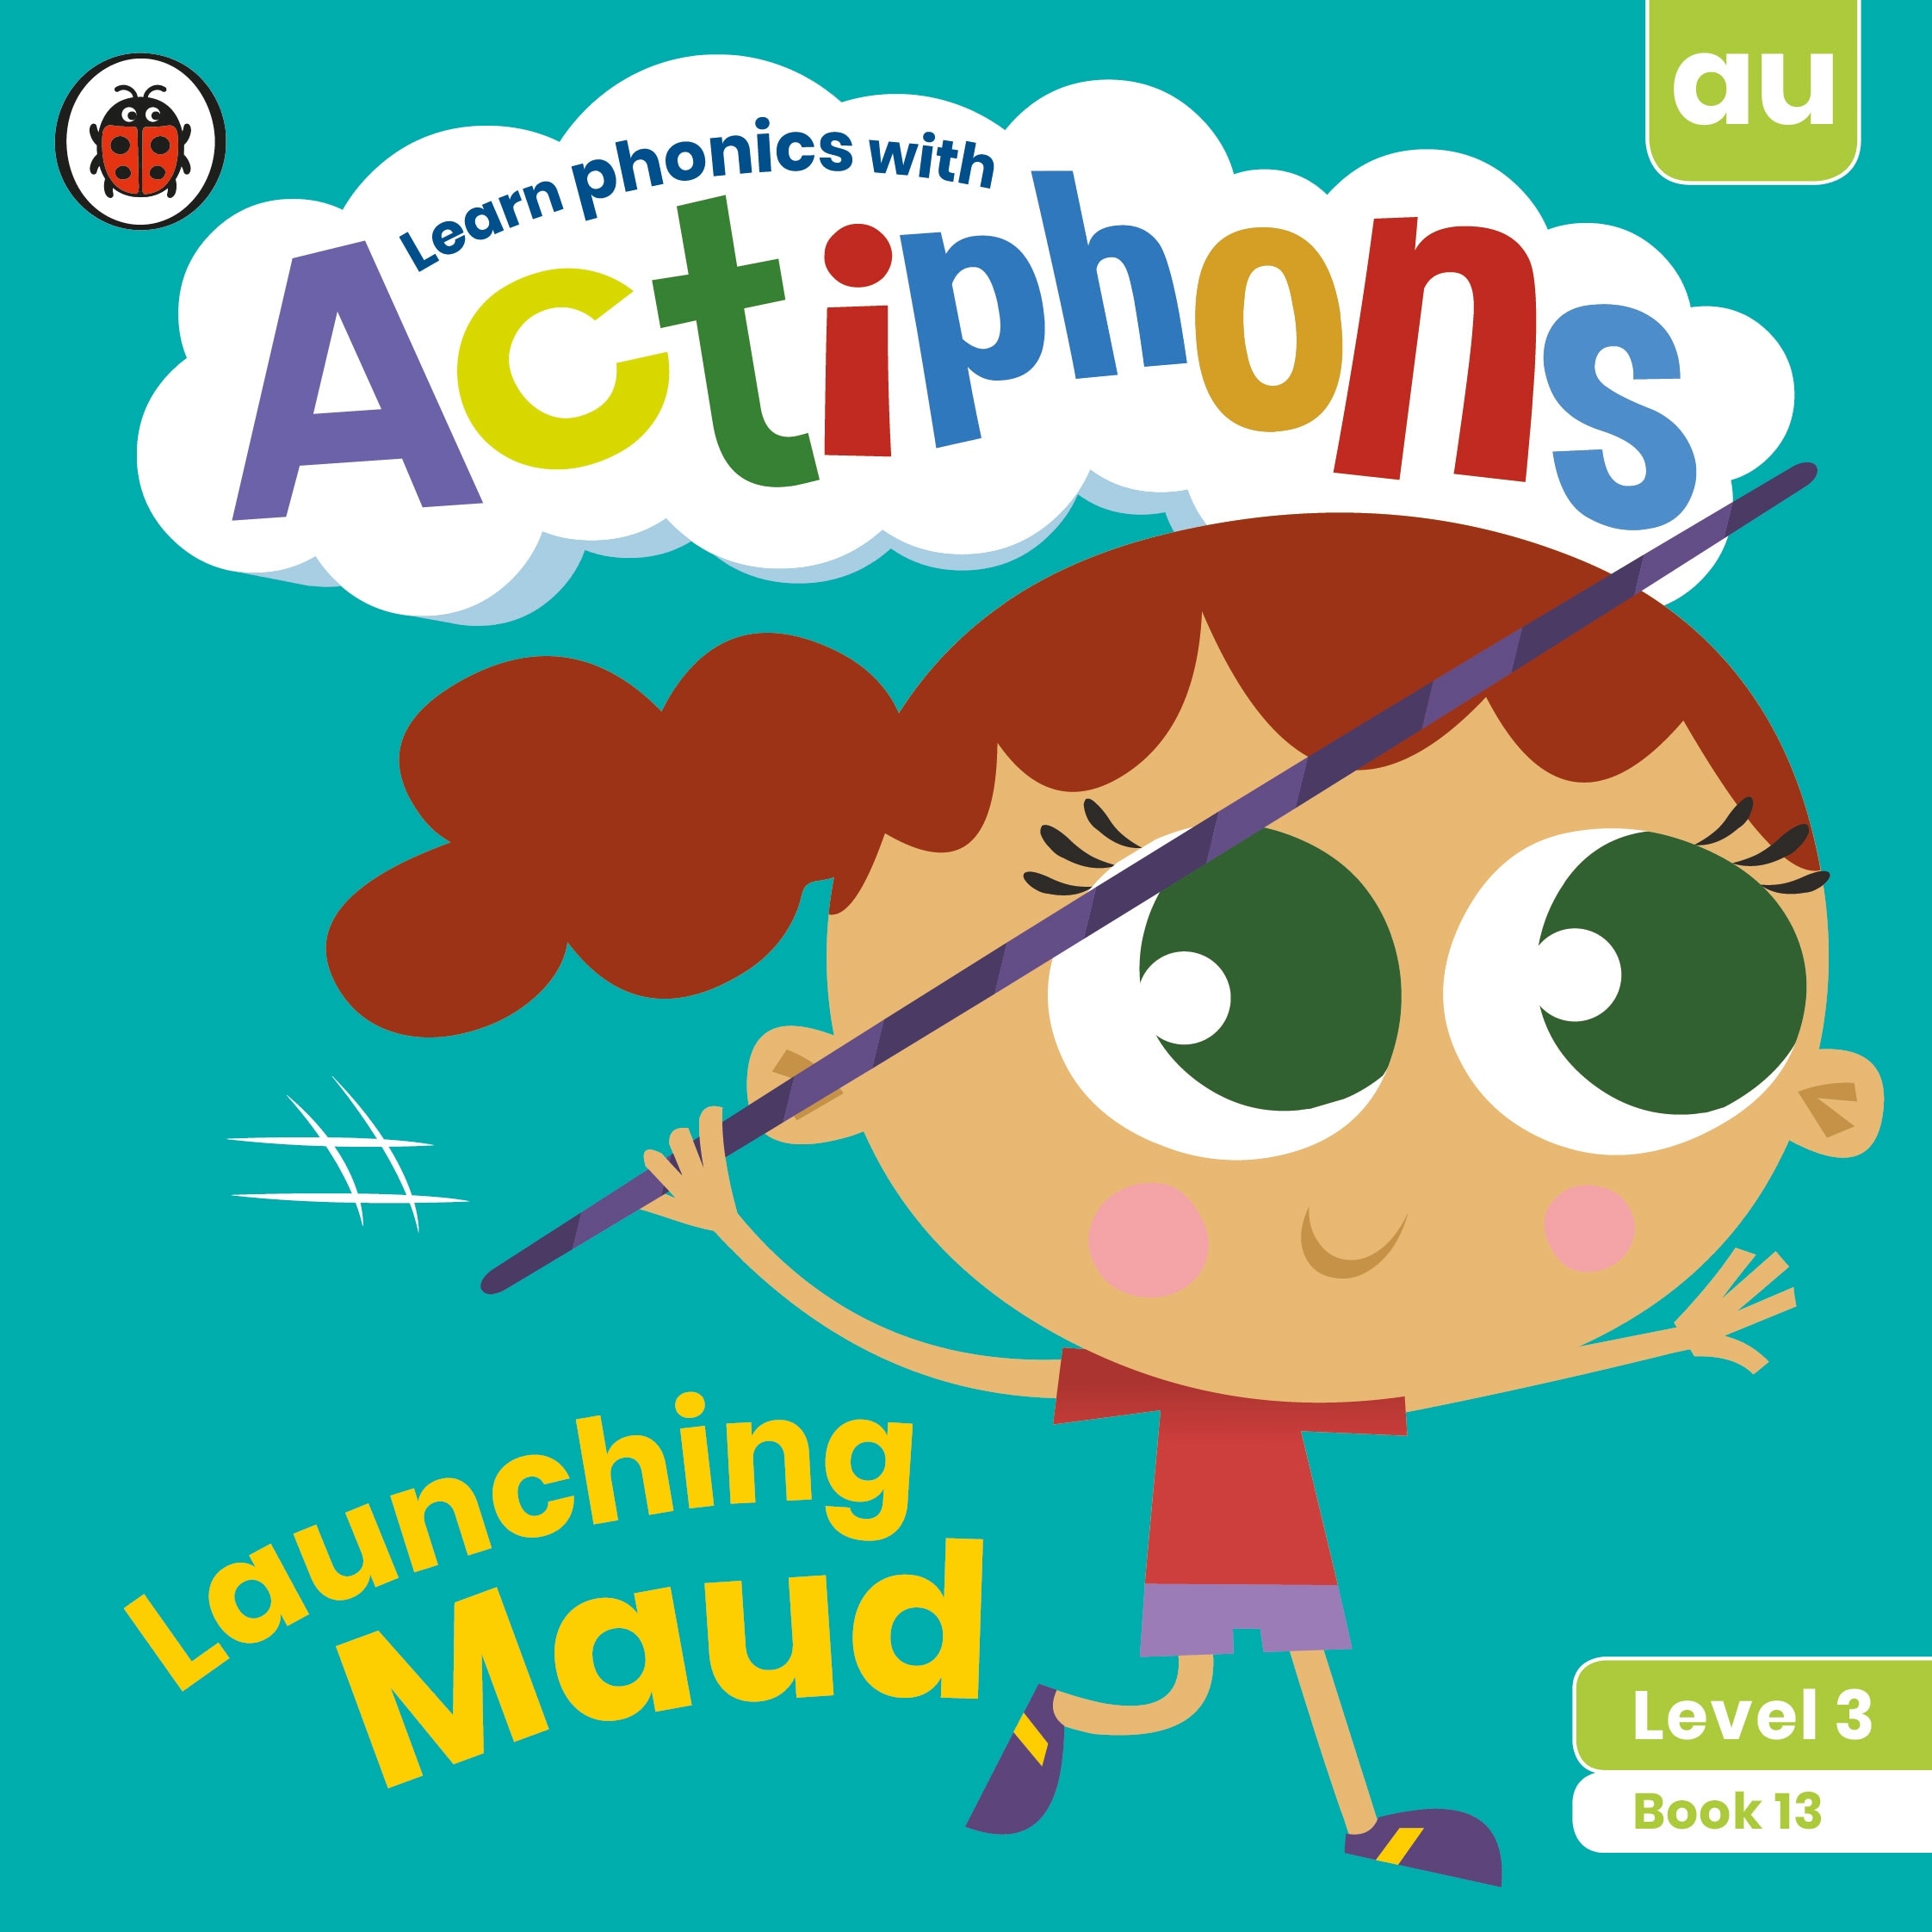 Actiphons Level 3 Book 13 Launching Maud